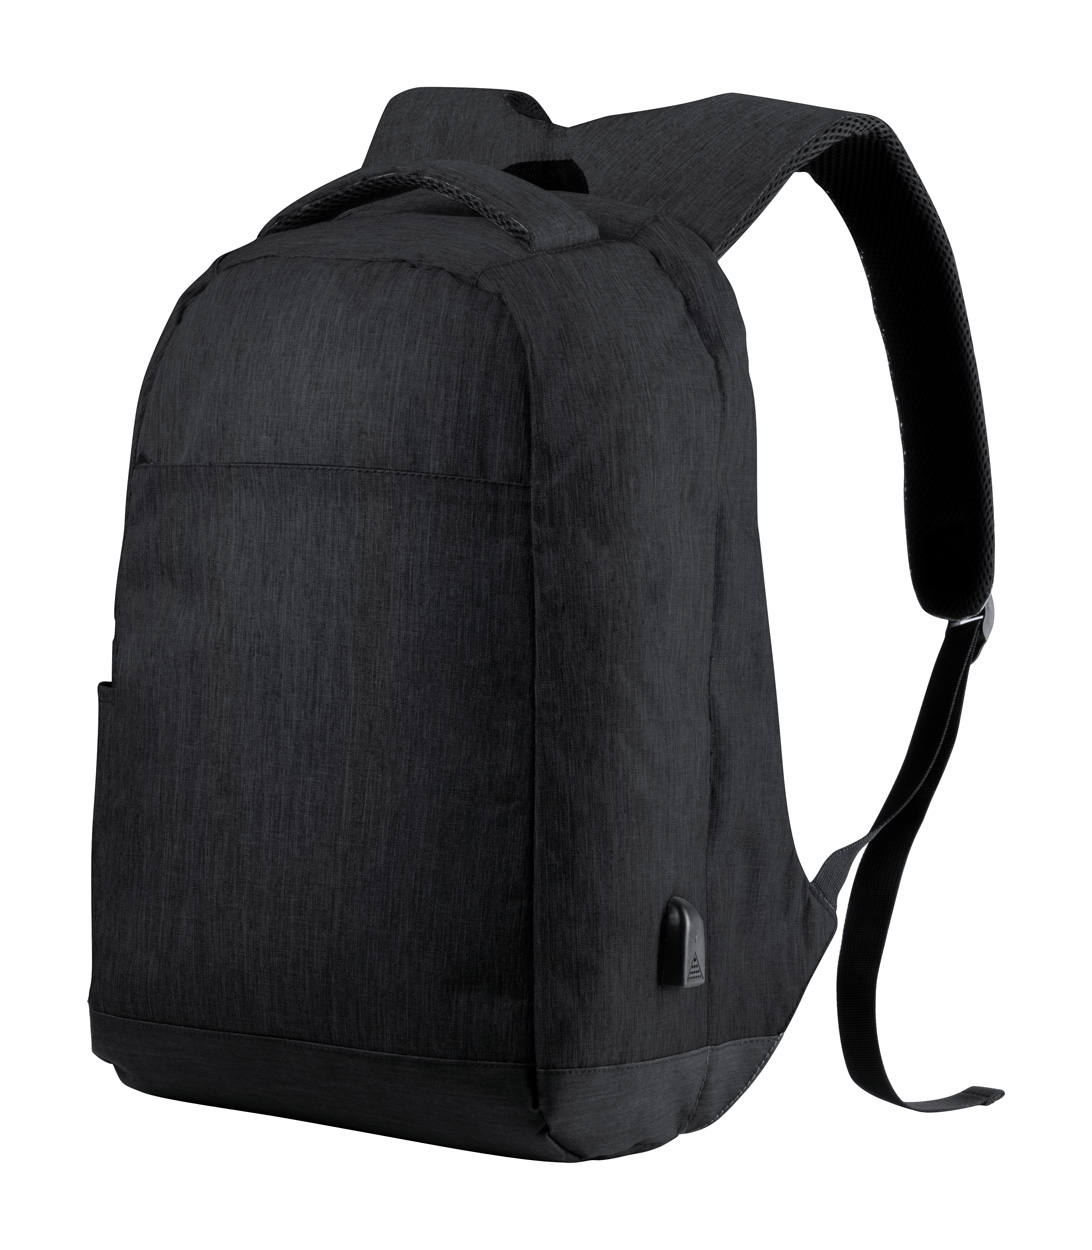 Promo  Vectom anti-theft backpack